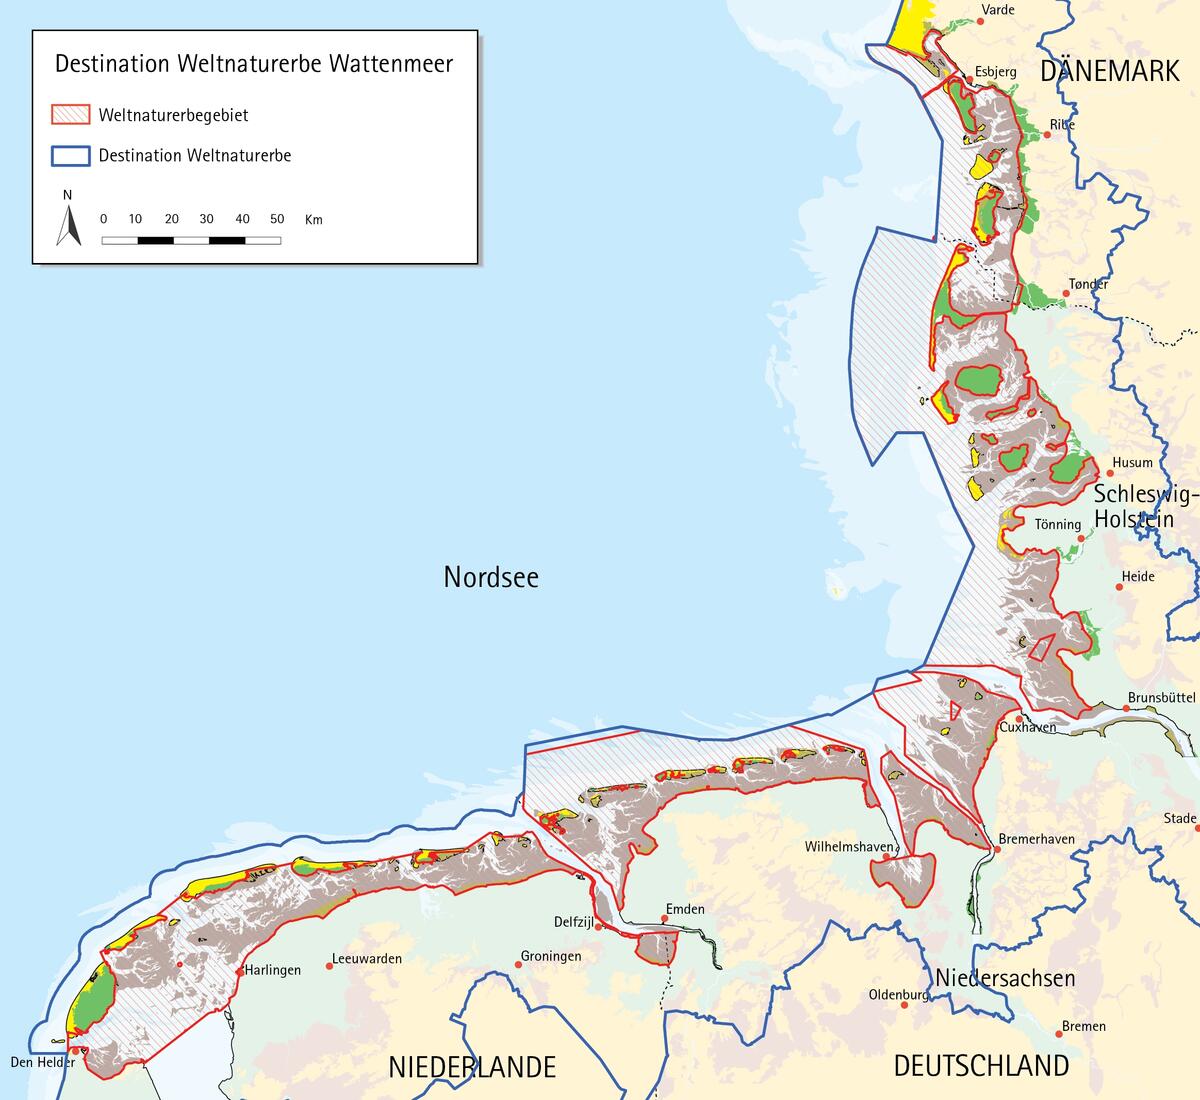 Map of the Wadden Sea Destination and World Heritage site. CWSS.